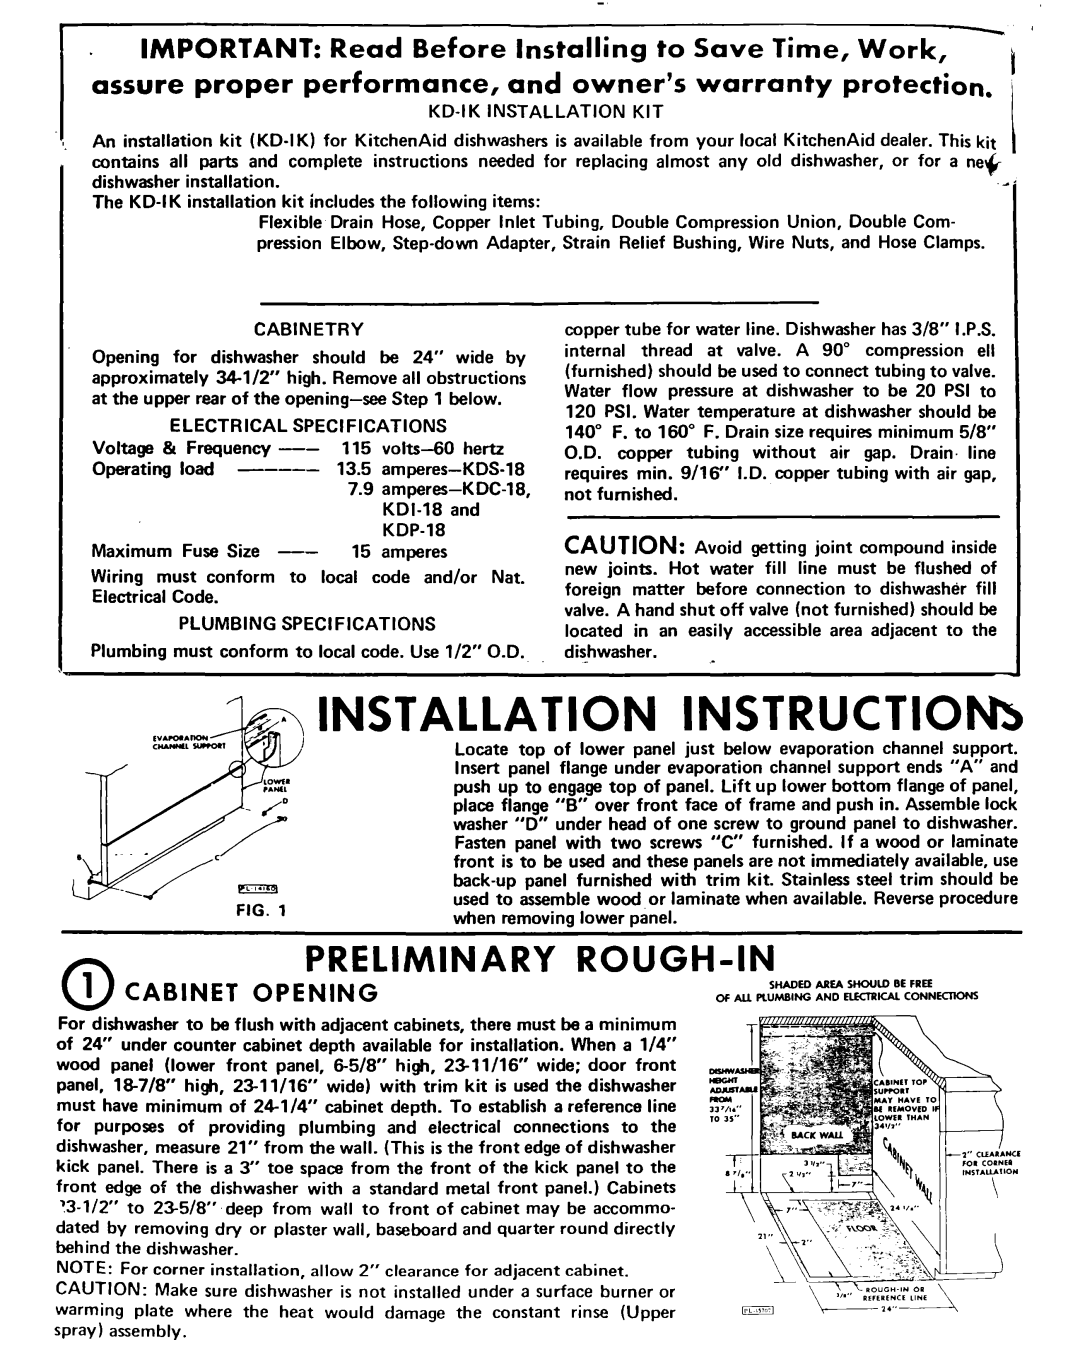 KitchenAid KD-18 installation instructions Preliminary Rough-In, IN ALLATION INSTRUCTIONa 